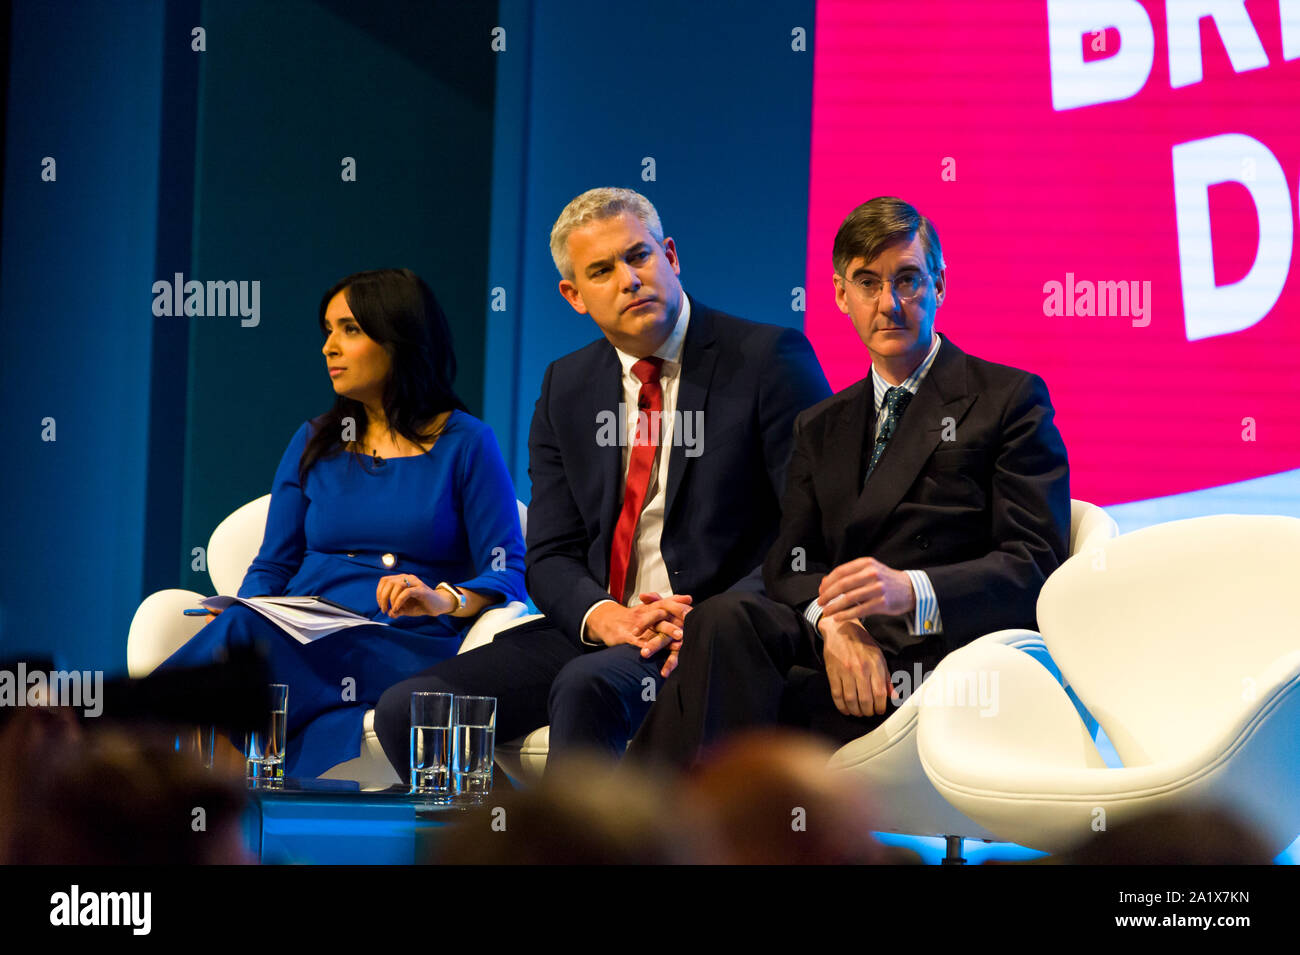 Manchester, UK. 29th September 2019. Dia Chakravarty chairs a discussion panel with Secretary of State for Exiting the European Union, The Rt Hon Steve Barclay MP, Leader of the House of Commons, The Rt Hon Jacob Rees-Mogg MP, and Chancellor of the Duchy of Lancaster, The Rt Hon Michael Gove MP on day 1 of the 2019 Conservative Party Conference at Manchester Central. Credit: Paul Warburton/Alamy Live News Stock Photo